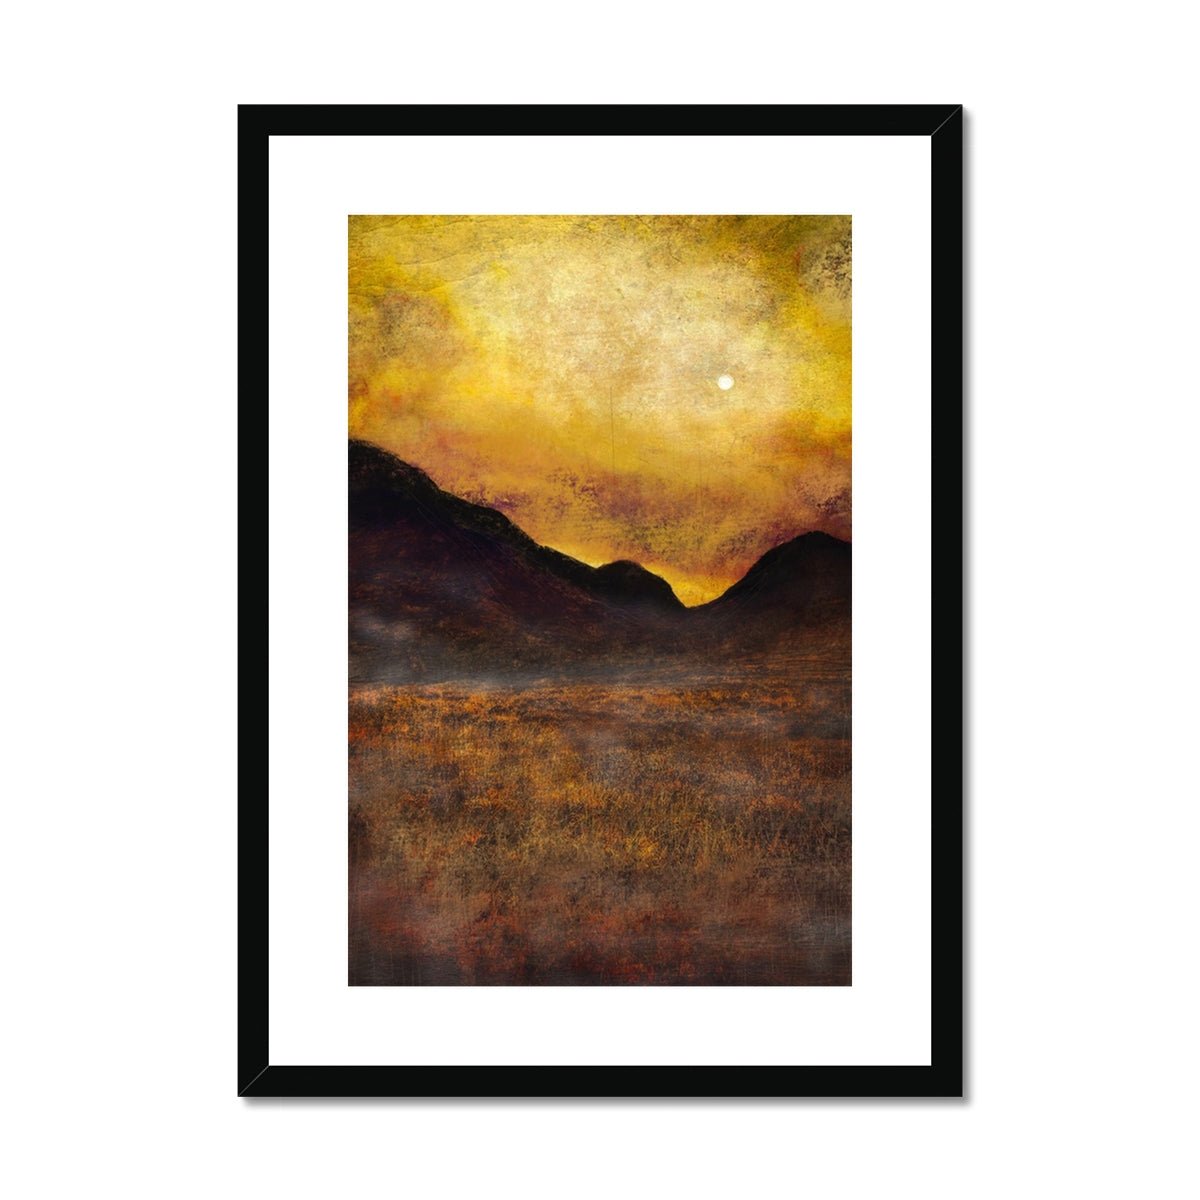 Glencoe Moonlight Painting | Framed & Mounted Prints From Scotland-Framed & Mounted Prints-Glencoe Art Gallery-A2 Portrait-Black Frame-Paintings, Prints, Homeware, Art Gifts From Scotland By Scottish Artist Kevin Hunter